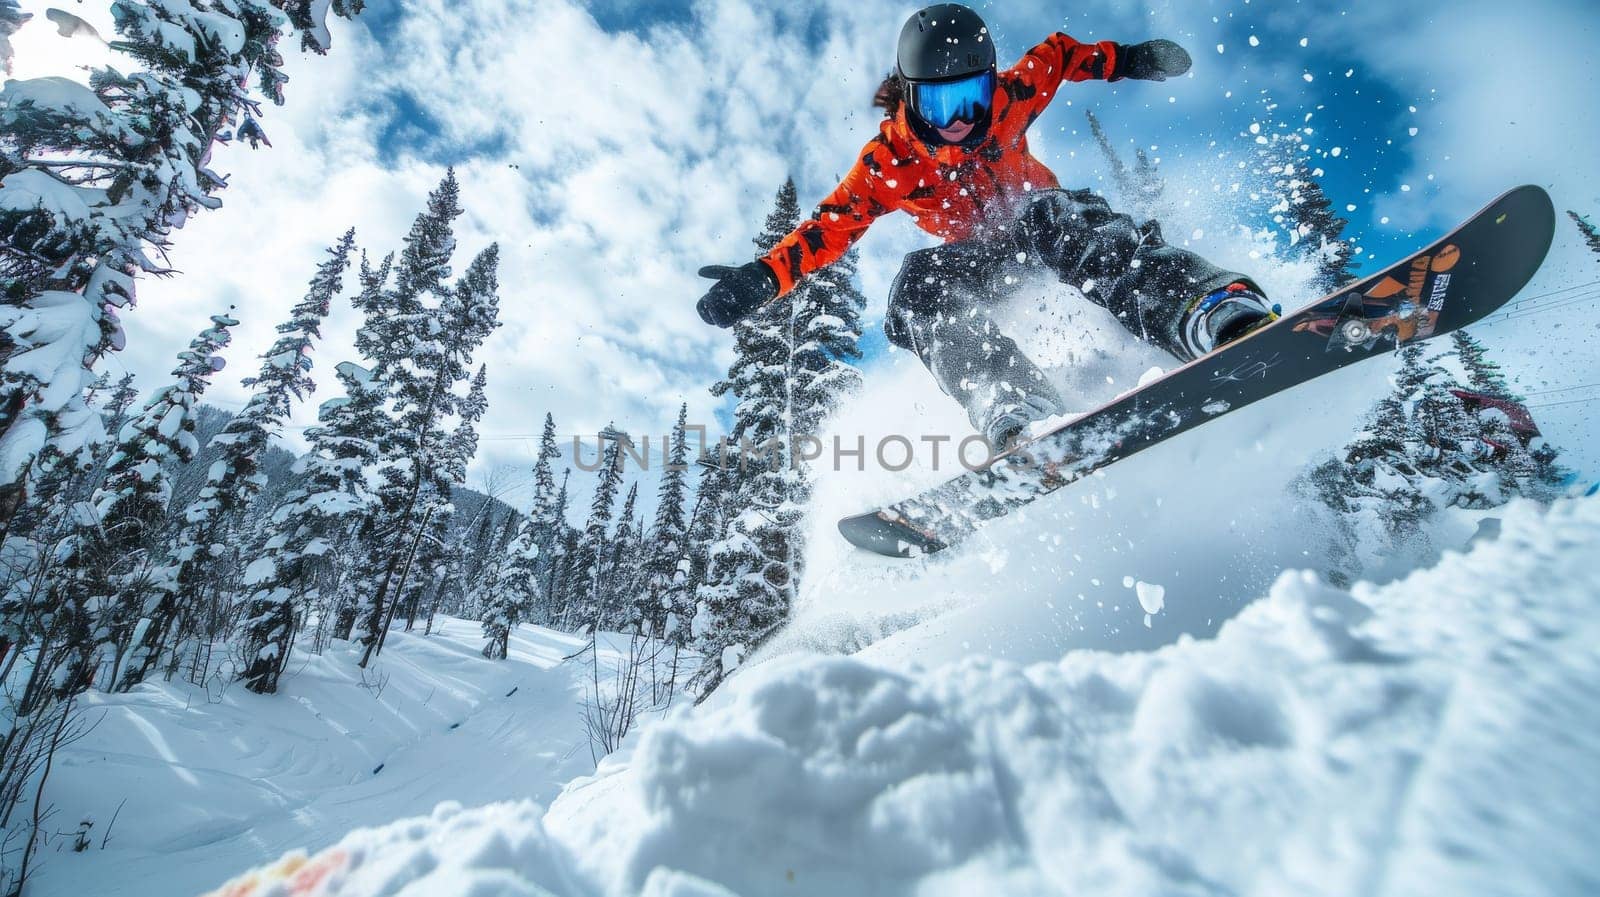 A snowboarder is in mid-air, performing a trick on a snow-covered slope. The image captures the excitement and thrill of snowboarding, as the person skillfully maneuvers their board through the air